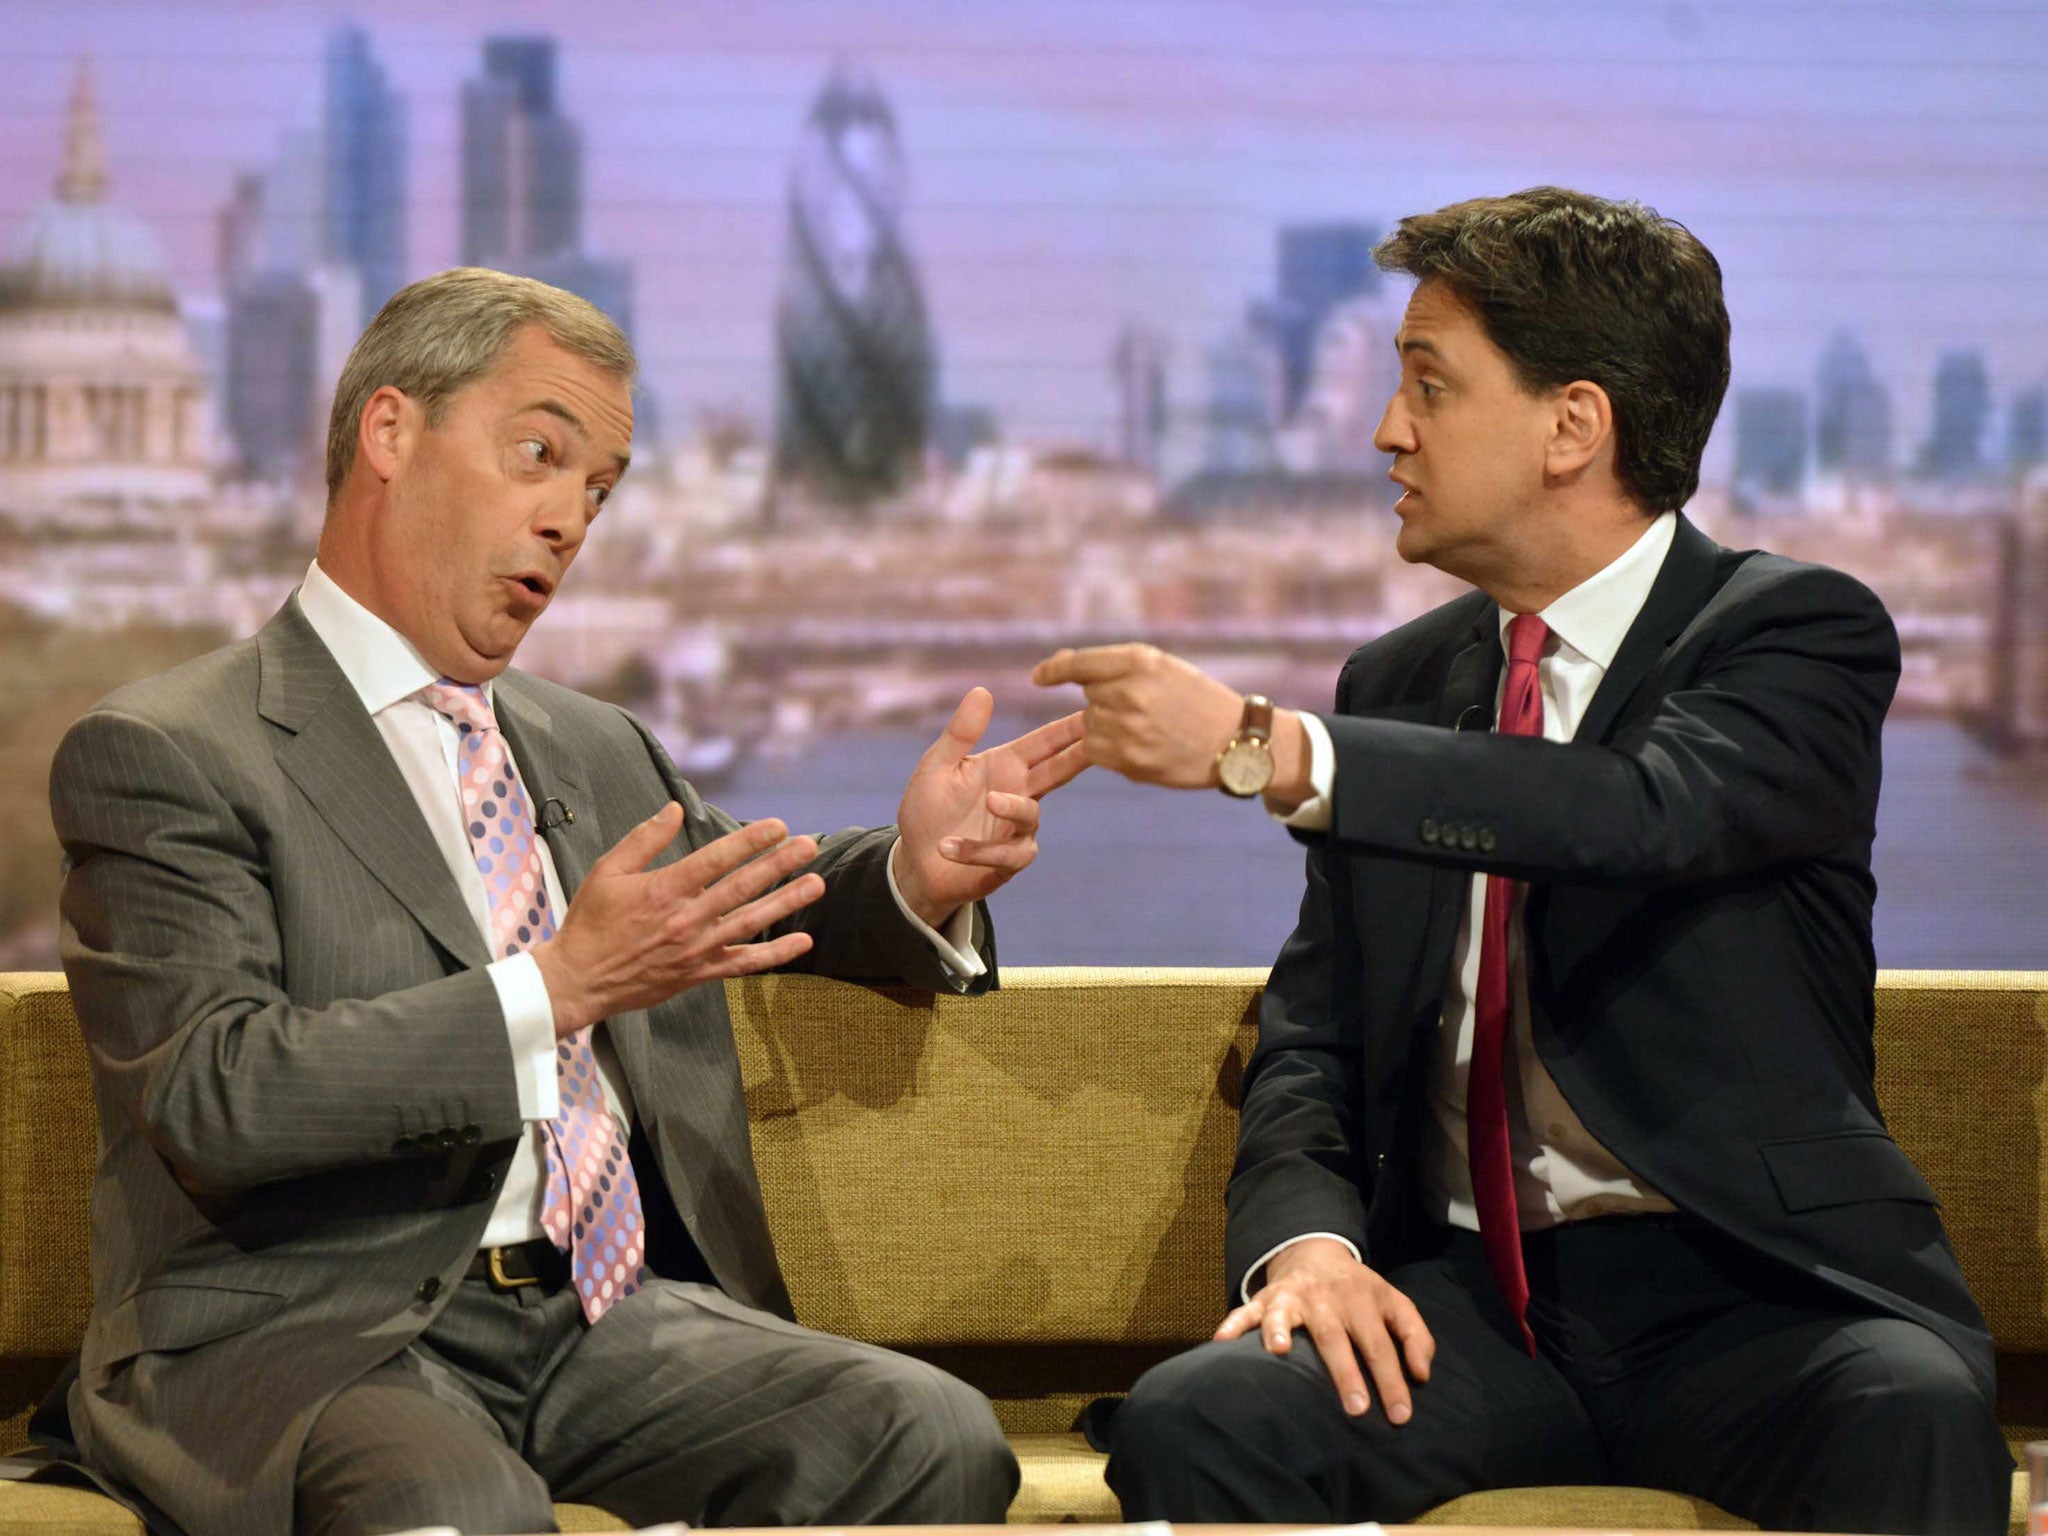 Nigel Farage debates with Labour’s Ed Miliband on ‘The Andrew Marr Show’